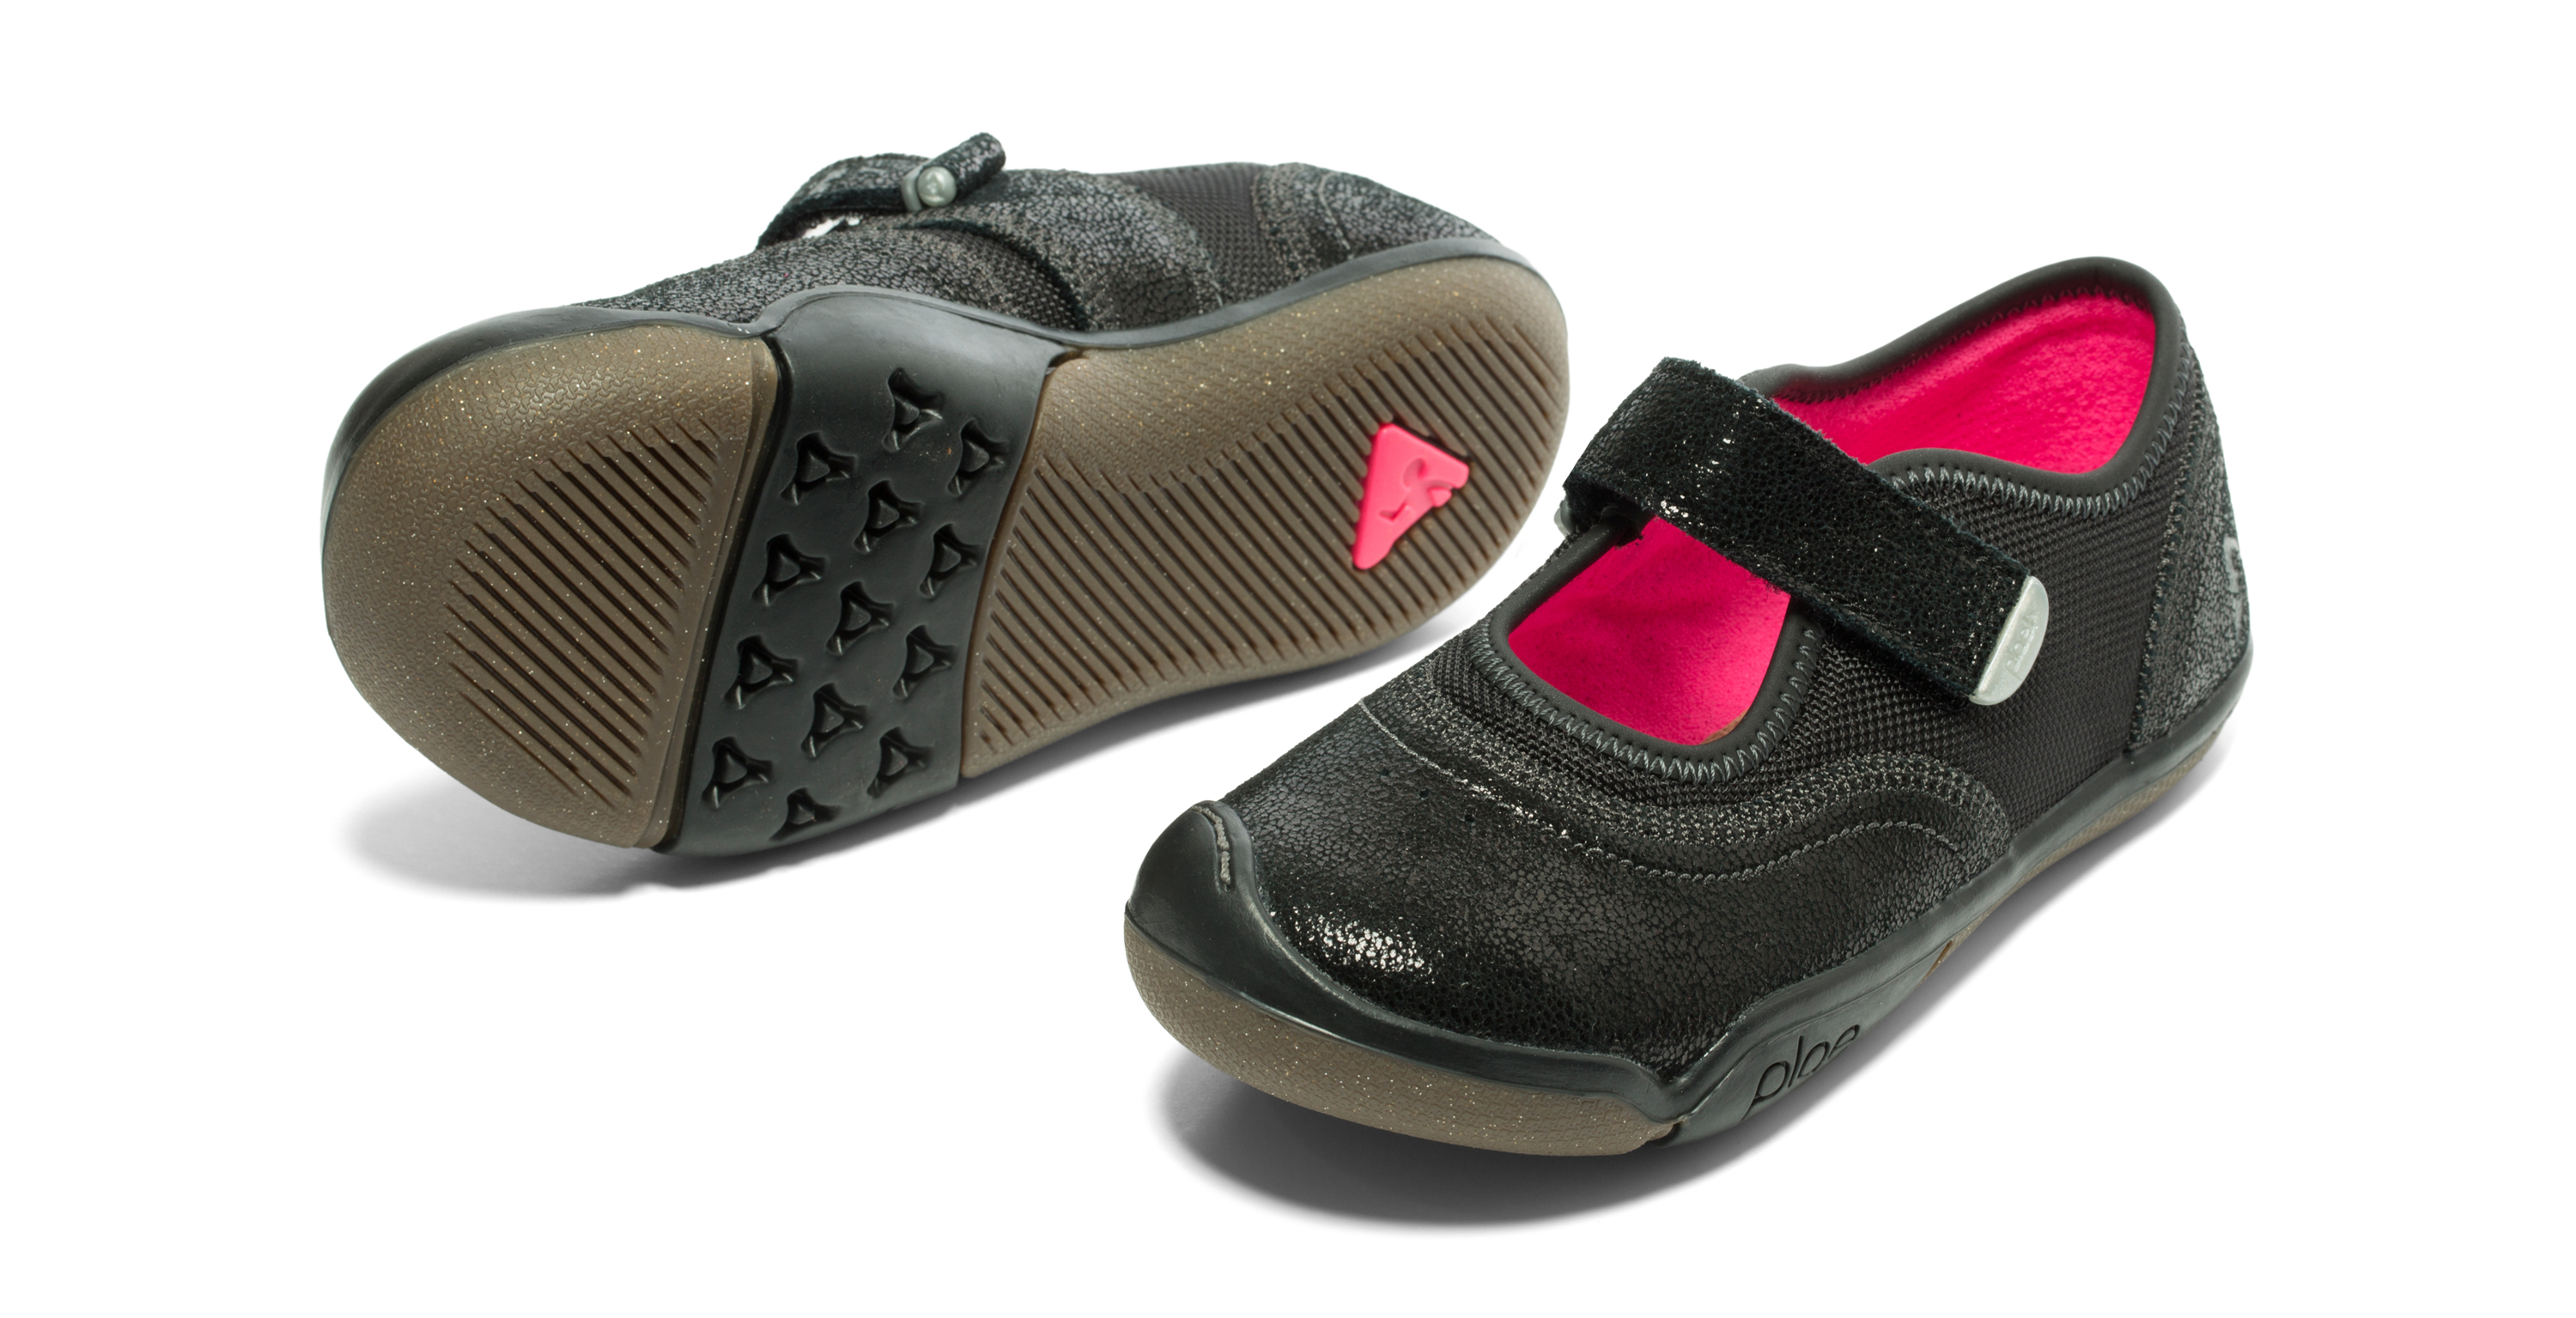 NEW | Plae childrens shoes - coco mama style